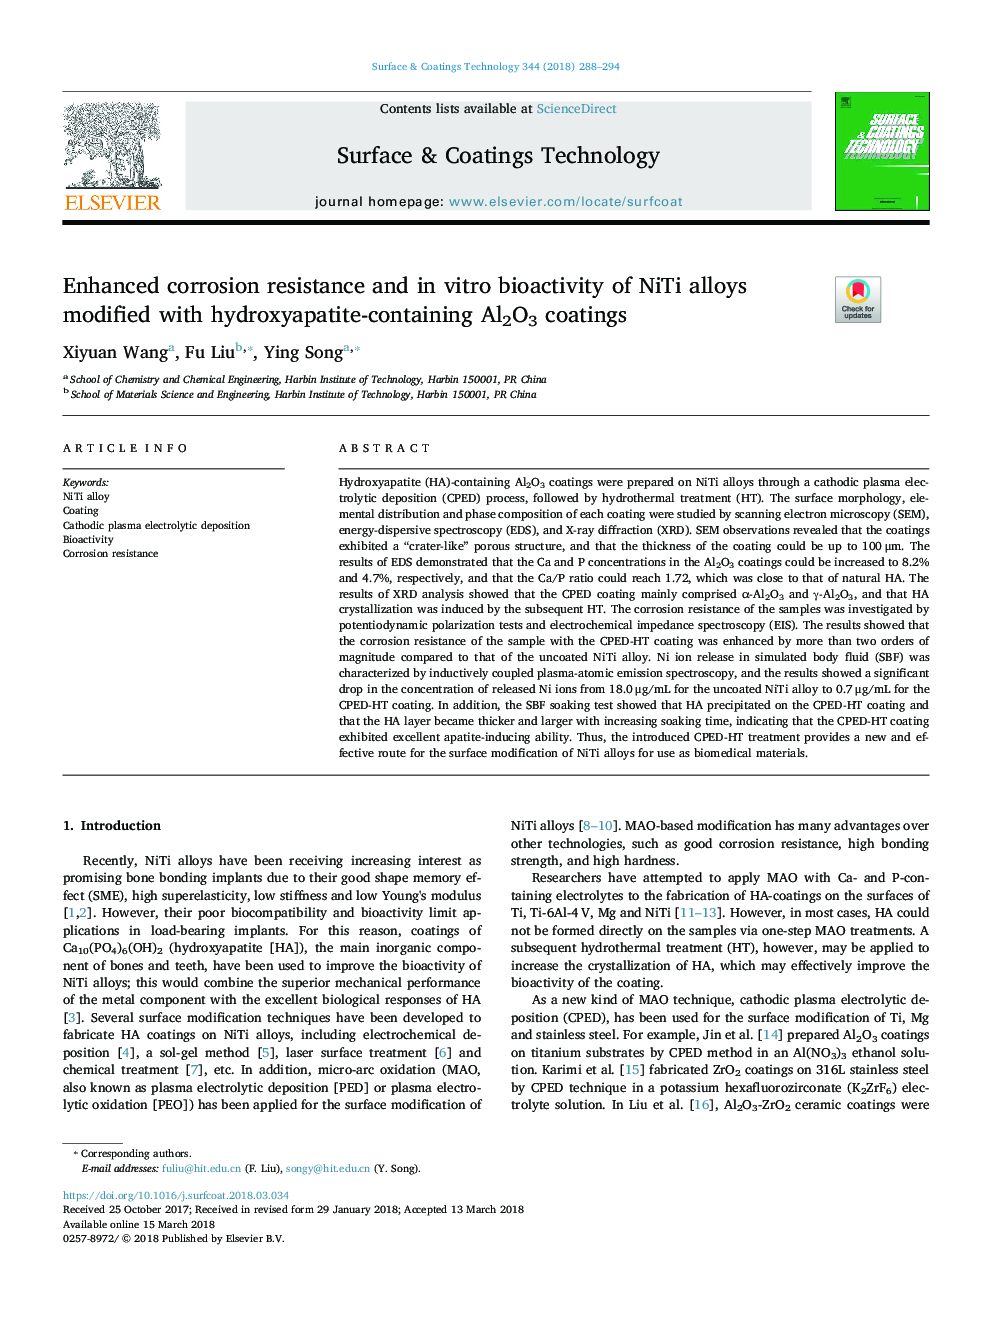 Enhanced corrosion resistance and in vitro bioactivity of NiTi alloys modified with hydroxyapatite-containing Al2O3 coatings